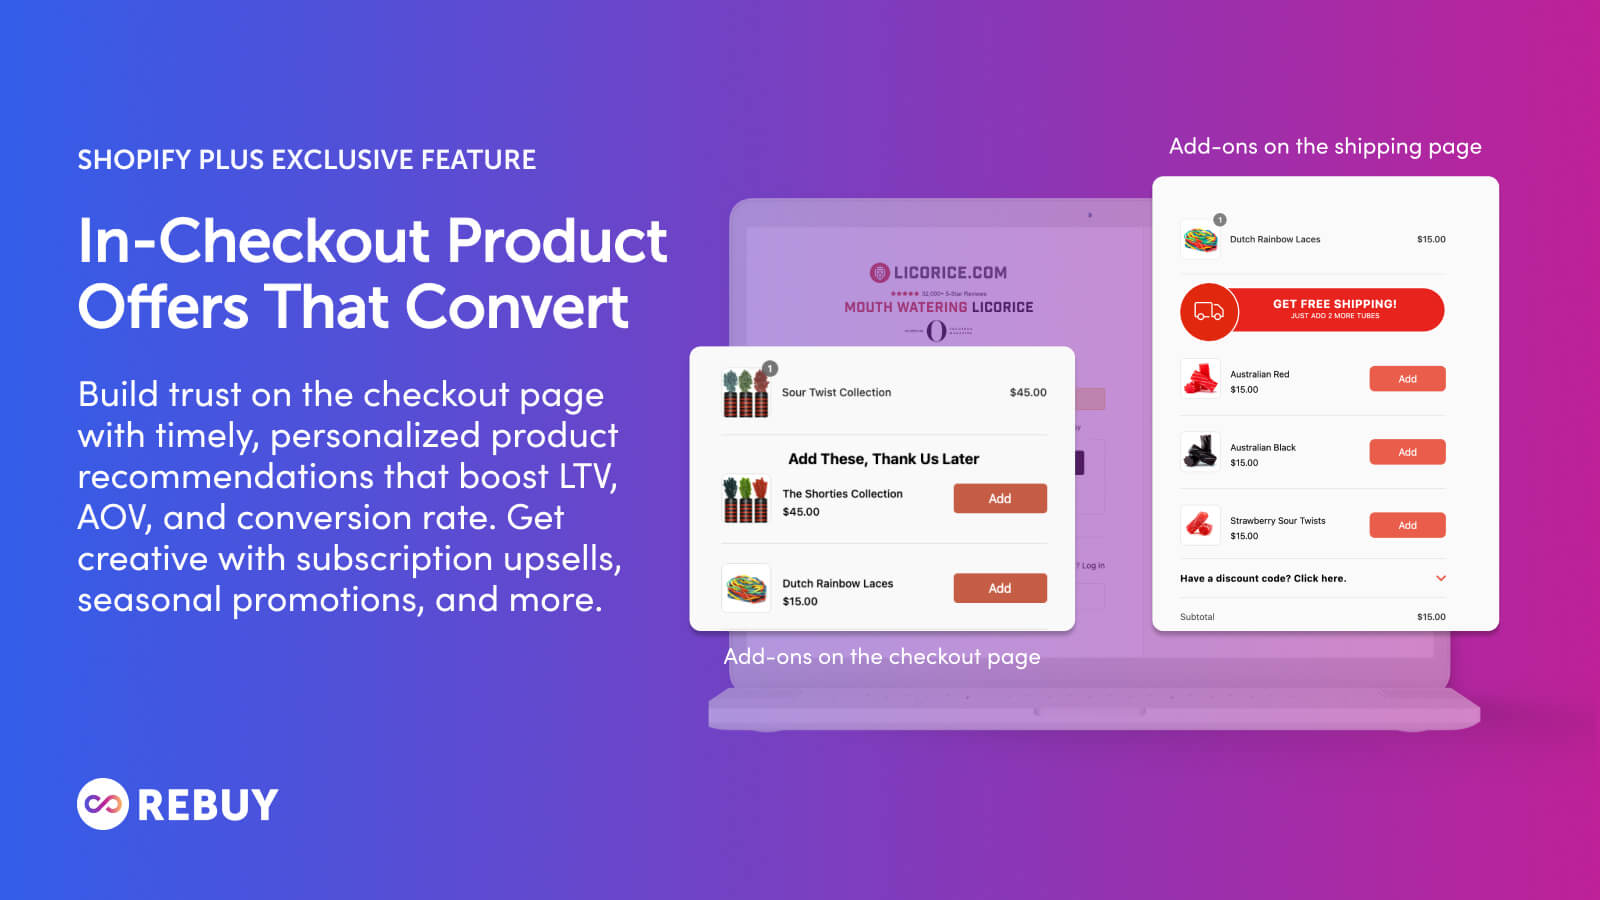 Convert shoppers via checkout customizations and upsells